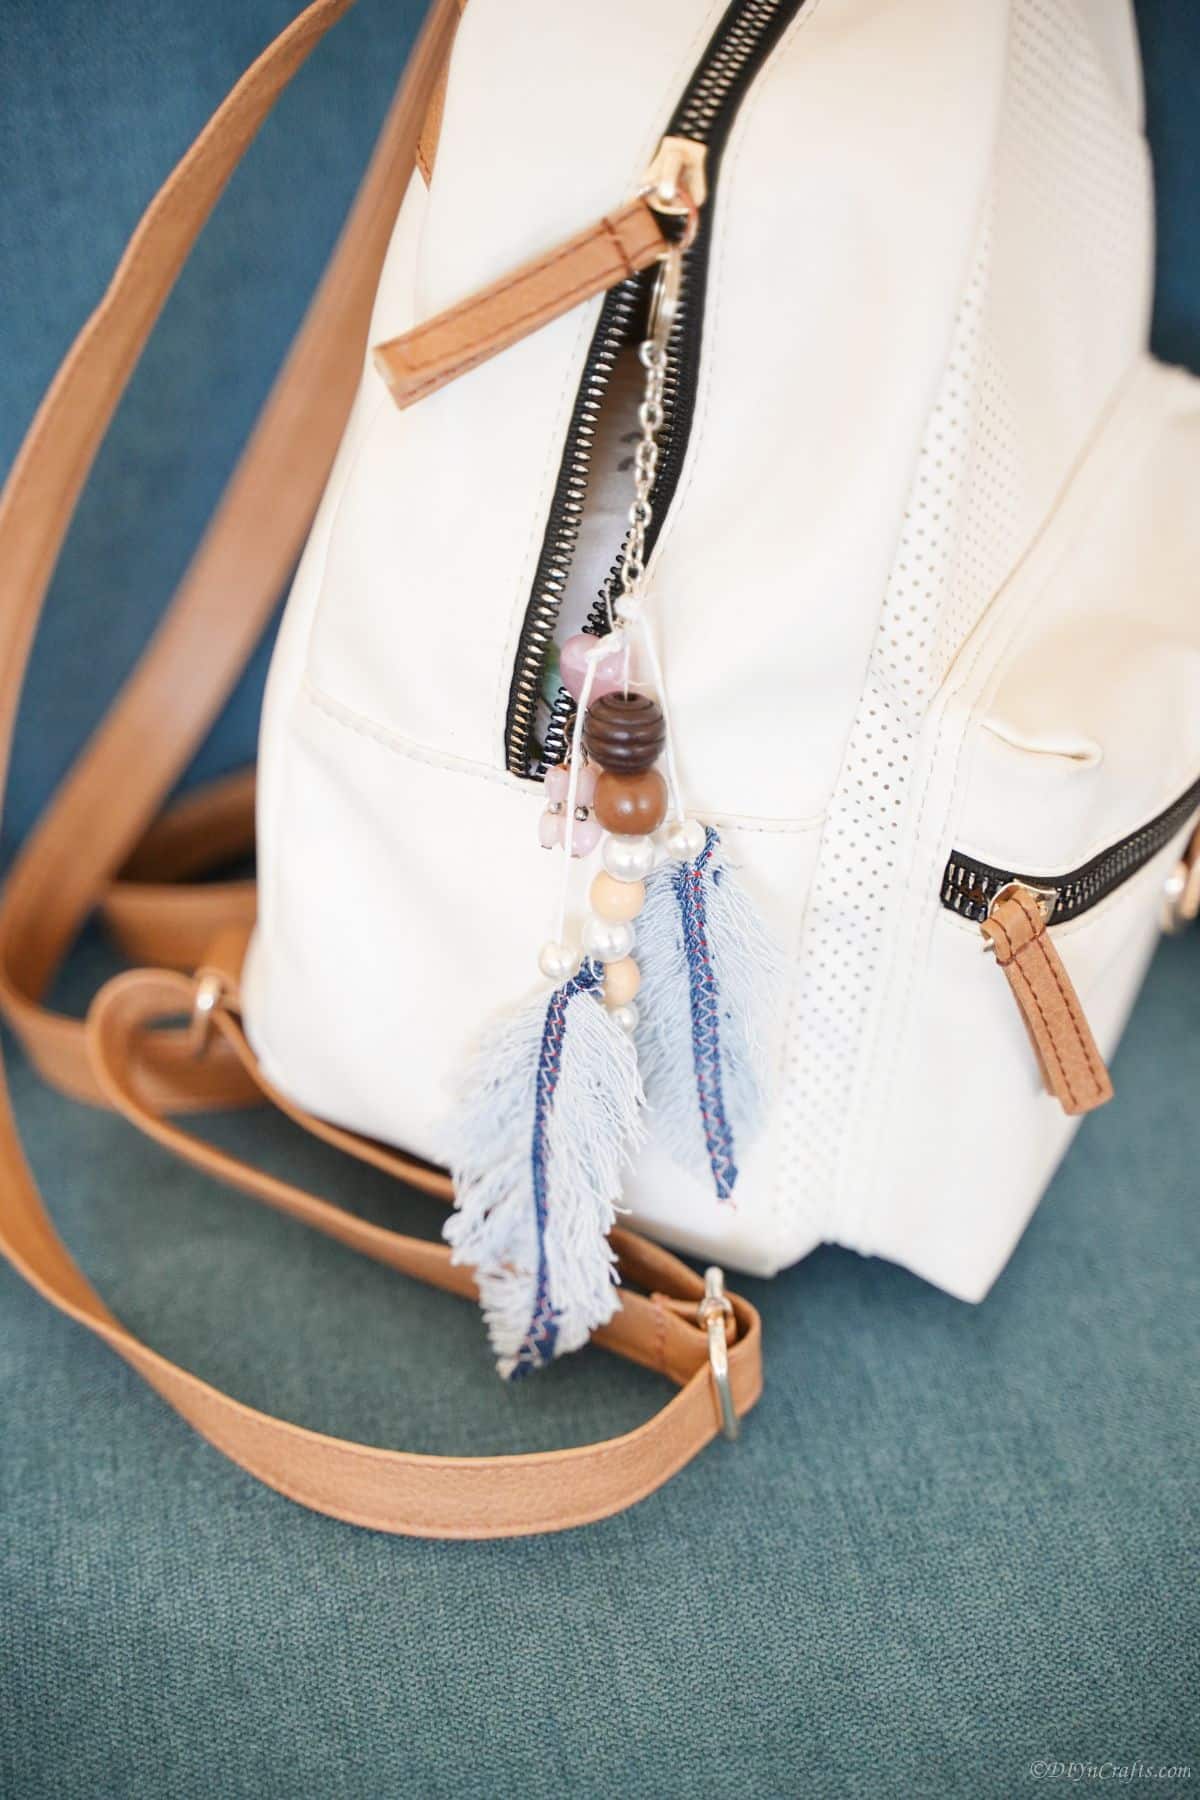 denim feather keychain hooked on side of white backpack purse